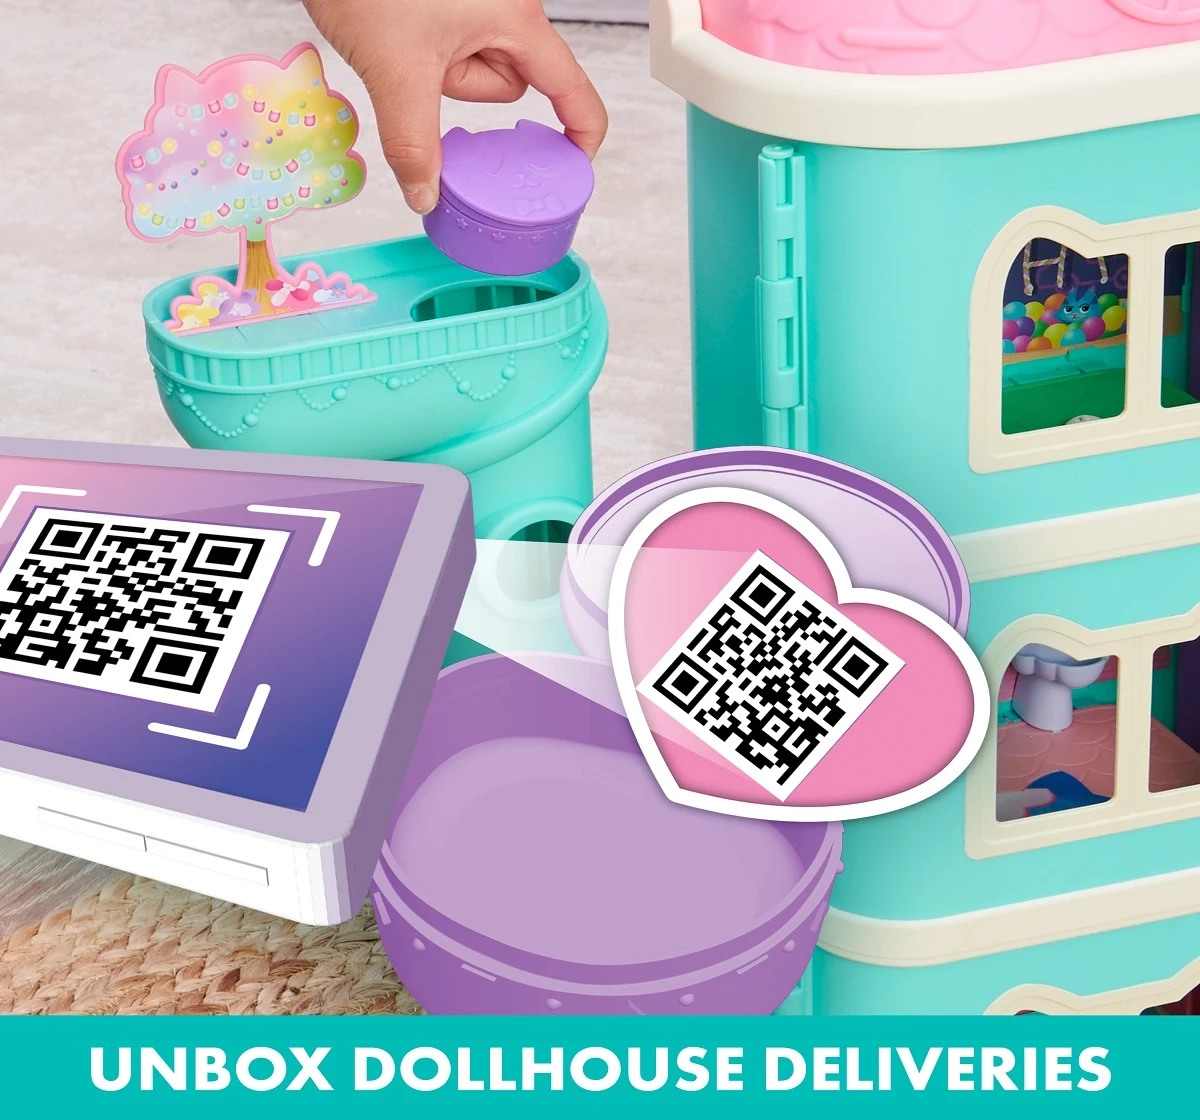 Gabby’S Dollhouse, Purrfect Dollhouse With 2 Toy Figures, 8 Furniture Pieces, 3 Accessories, 2 Deliveries And Sounds, Kids Toys For Ages 3 And Up